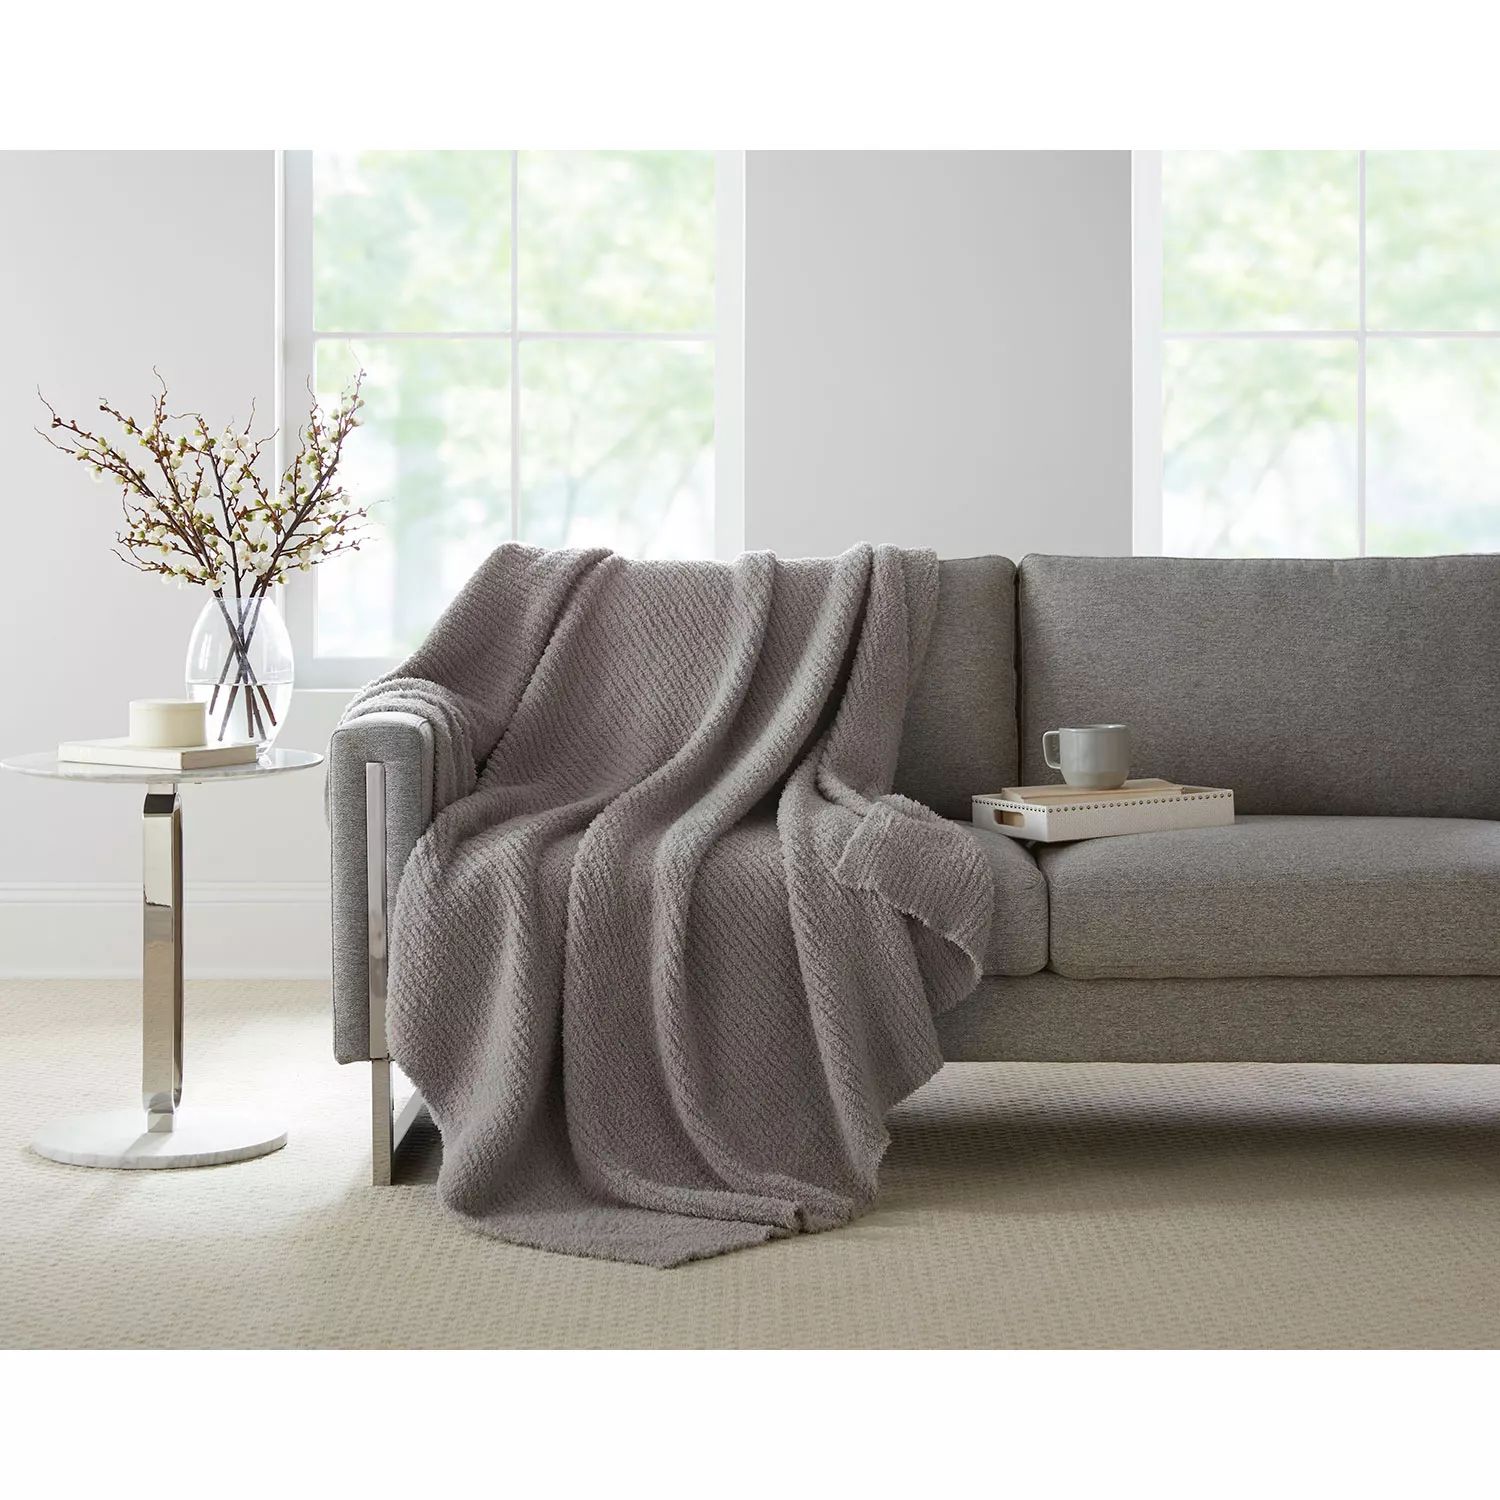 Member's Mark Luxury Premier Ribbed Collection Cozy Knit Throw 60"70" (Assorted Colors) | Sam's Club